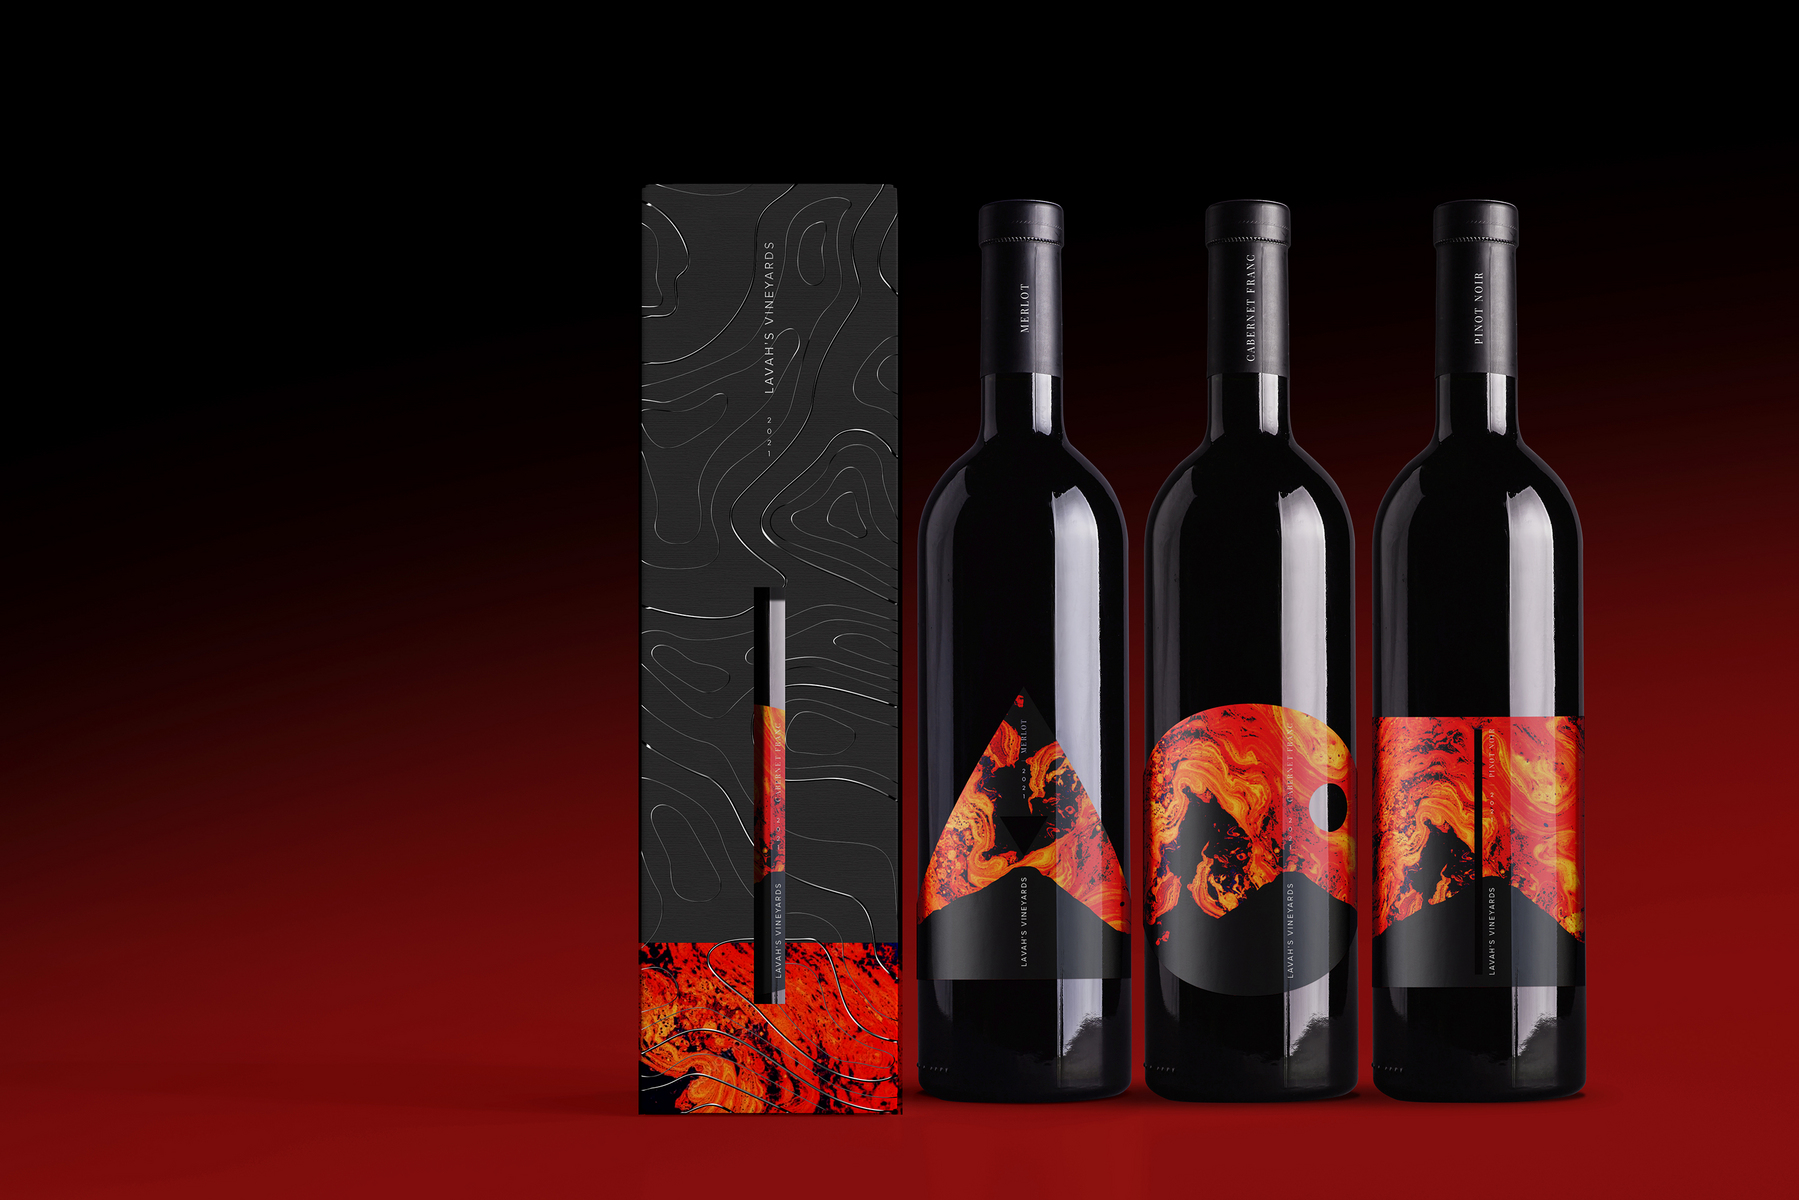 Wine bottles with prints applied to them